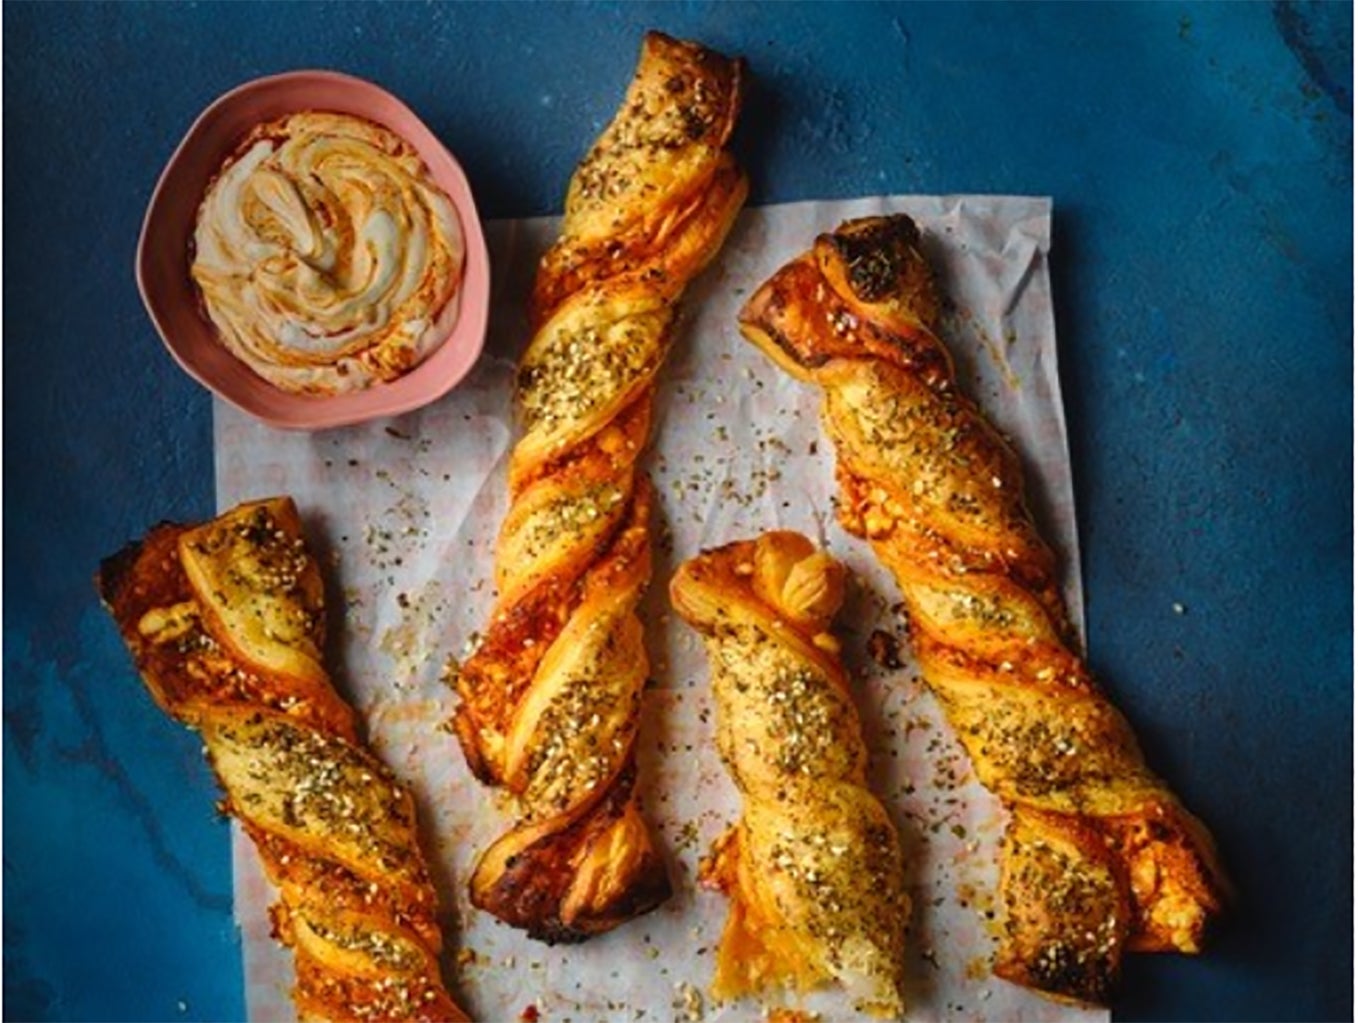 Preserved lemon, feta and za’atar twists from the cookbook